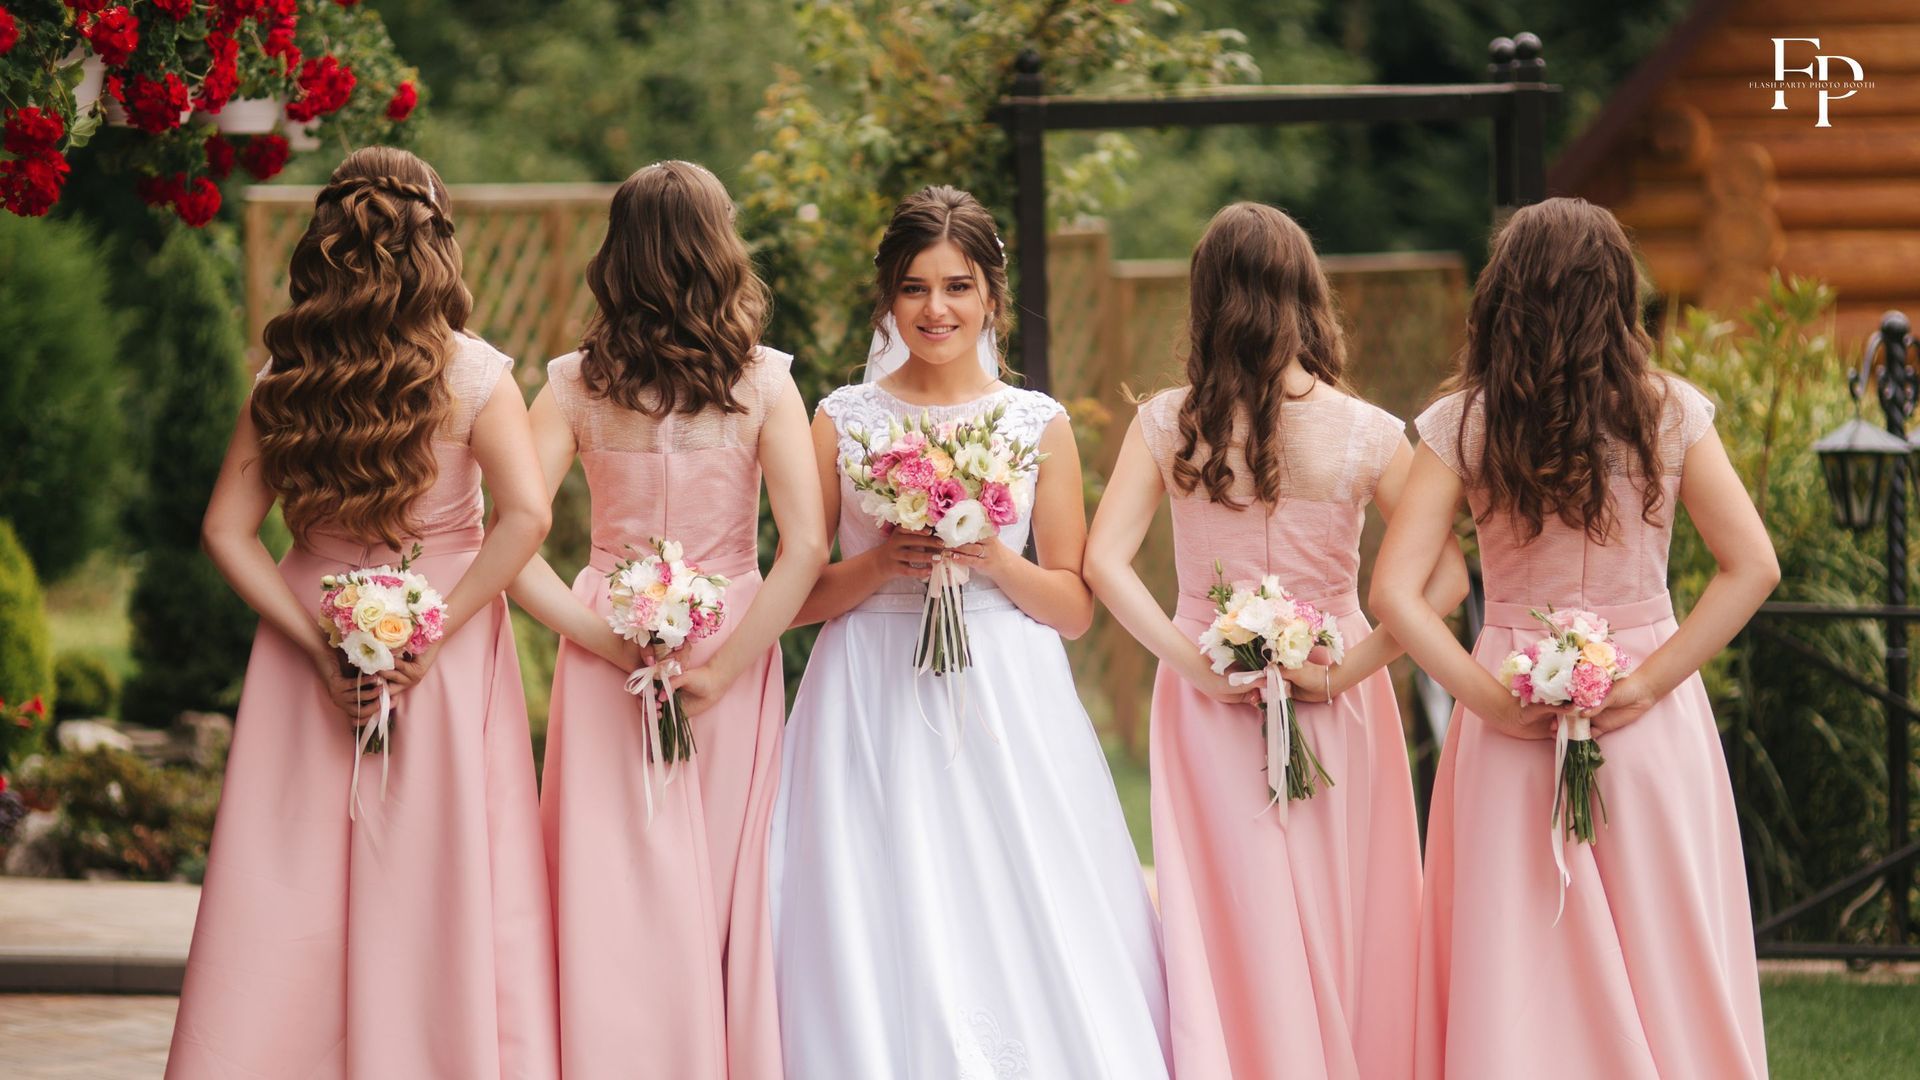 An image showing the bride and her bridesmaid posing together for a photo in Charlotte, Texas